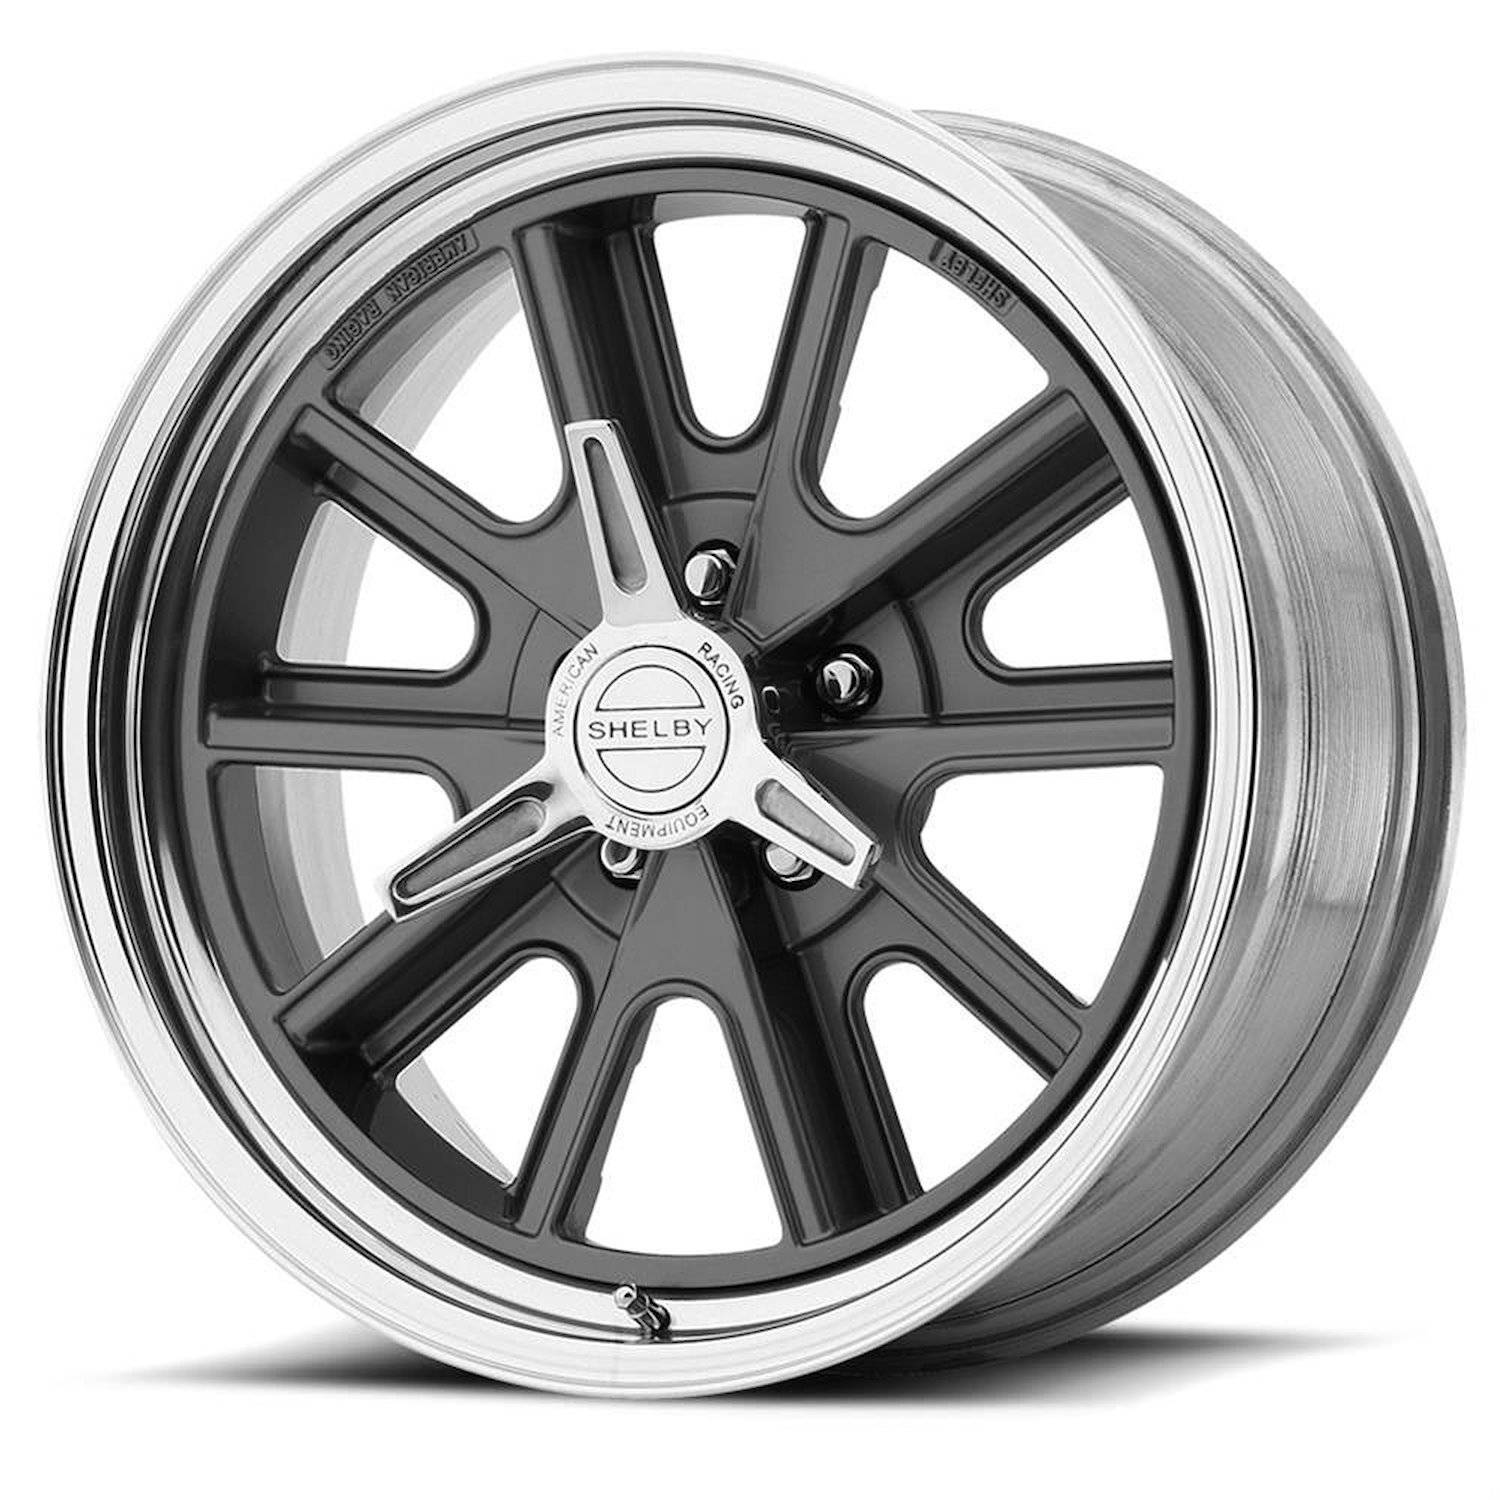 AMERICAN RACING 427 SHELBY COBRA TWO-PIECE MAG GRAY CENTER POLISHED BARREL 18 x 8 5X4.75 0 4.50